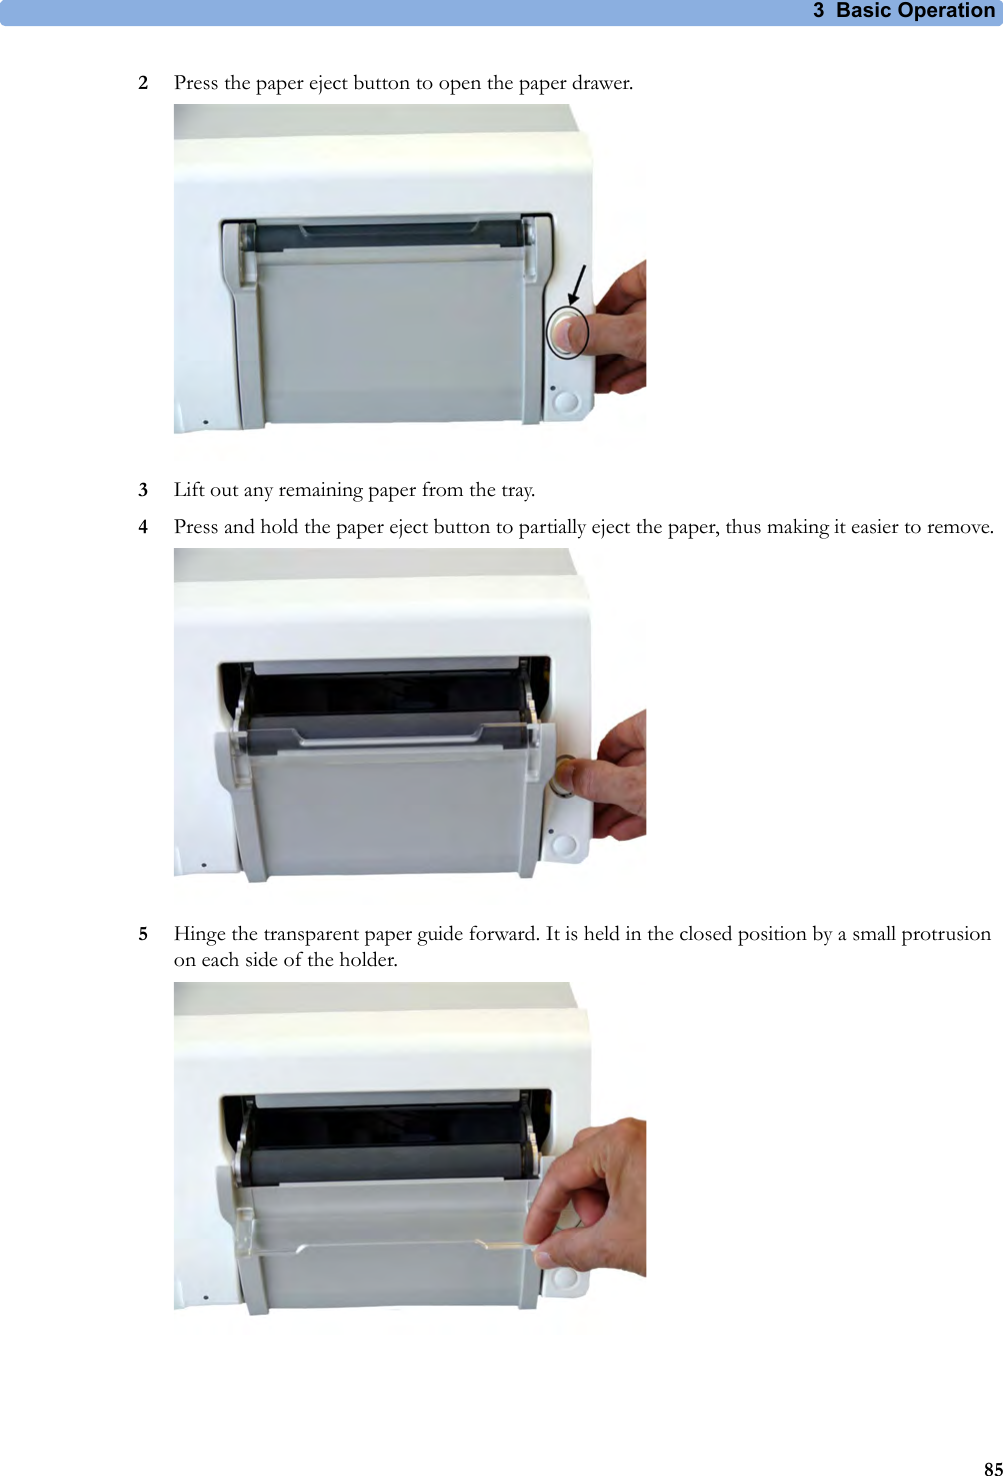 3 Basic Operation852Press the paper eject button to open the paper drawer.3Lift out any remaining paper from the tray. 4Press and hold the paper eject button to partially eject the paper, thus making it easier to remove.5Hinge the transparent paper guide forward. It is held in the closed position by a small protrusion on each side of the holder.